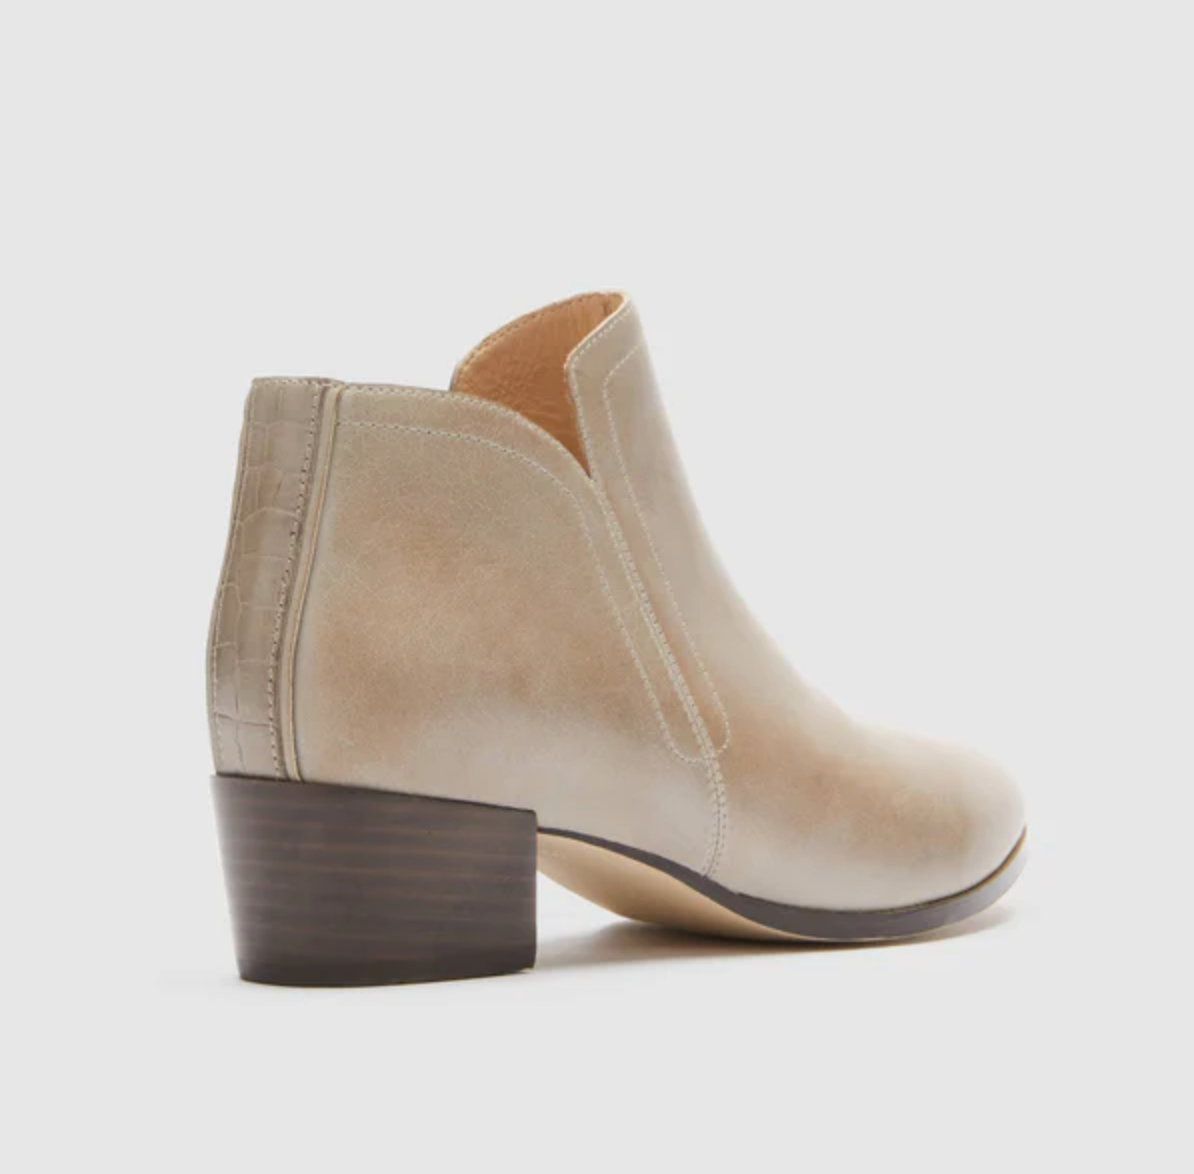 FRANKIE4 NOVAH TRUFFLE - Women Boots - Collective Shoes 